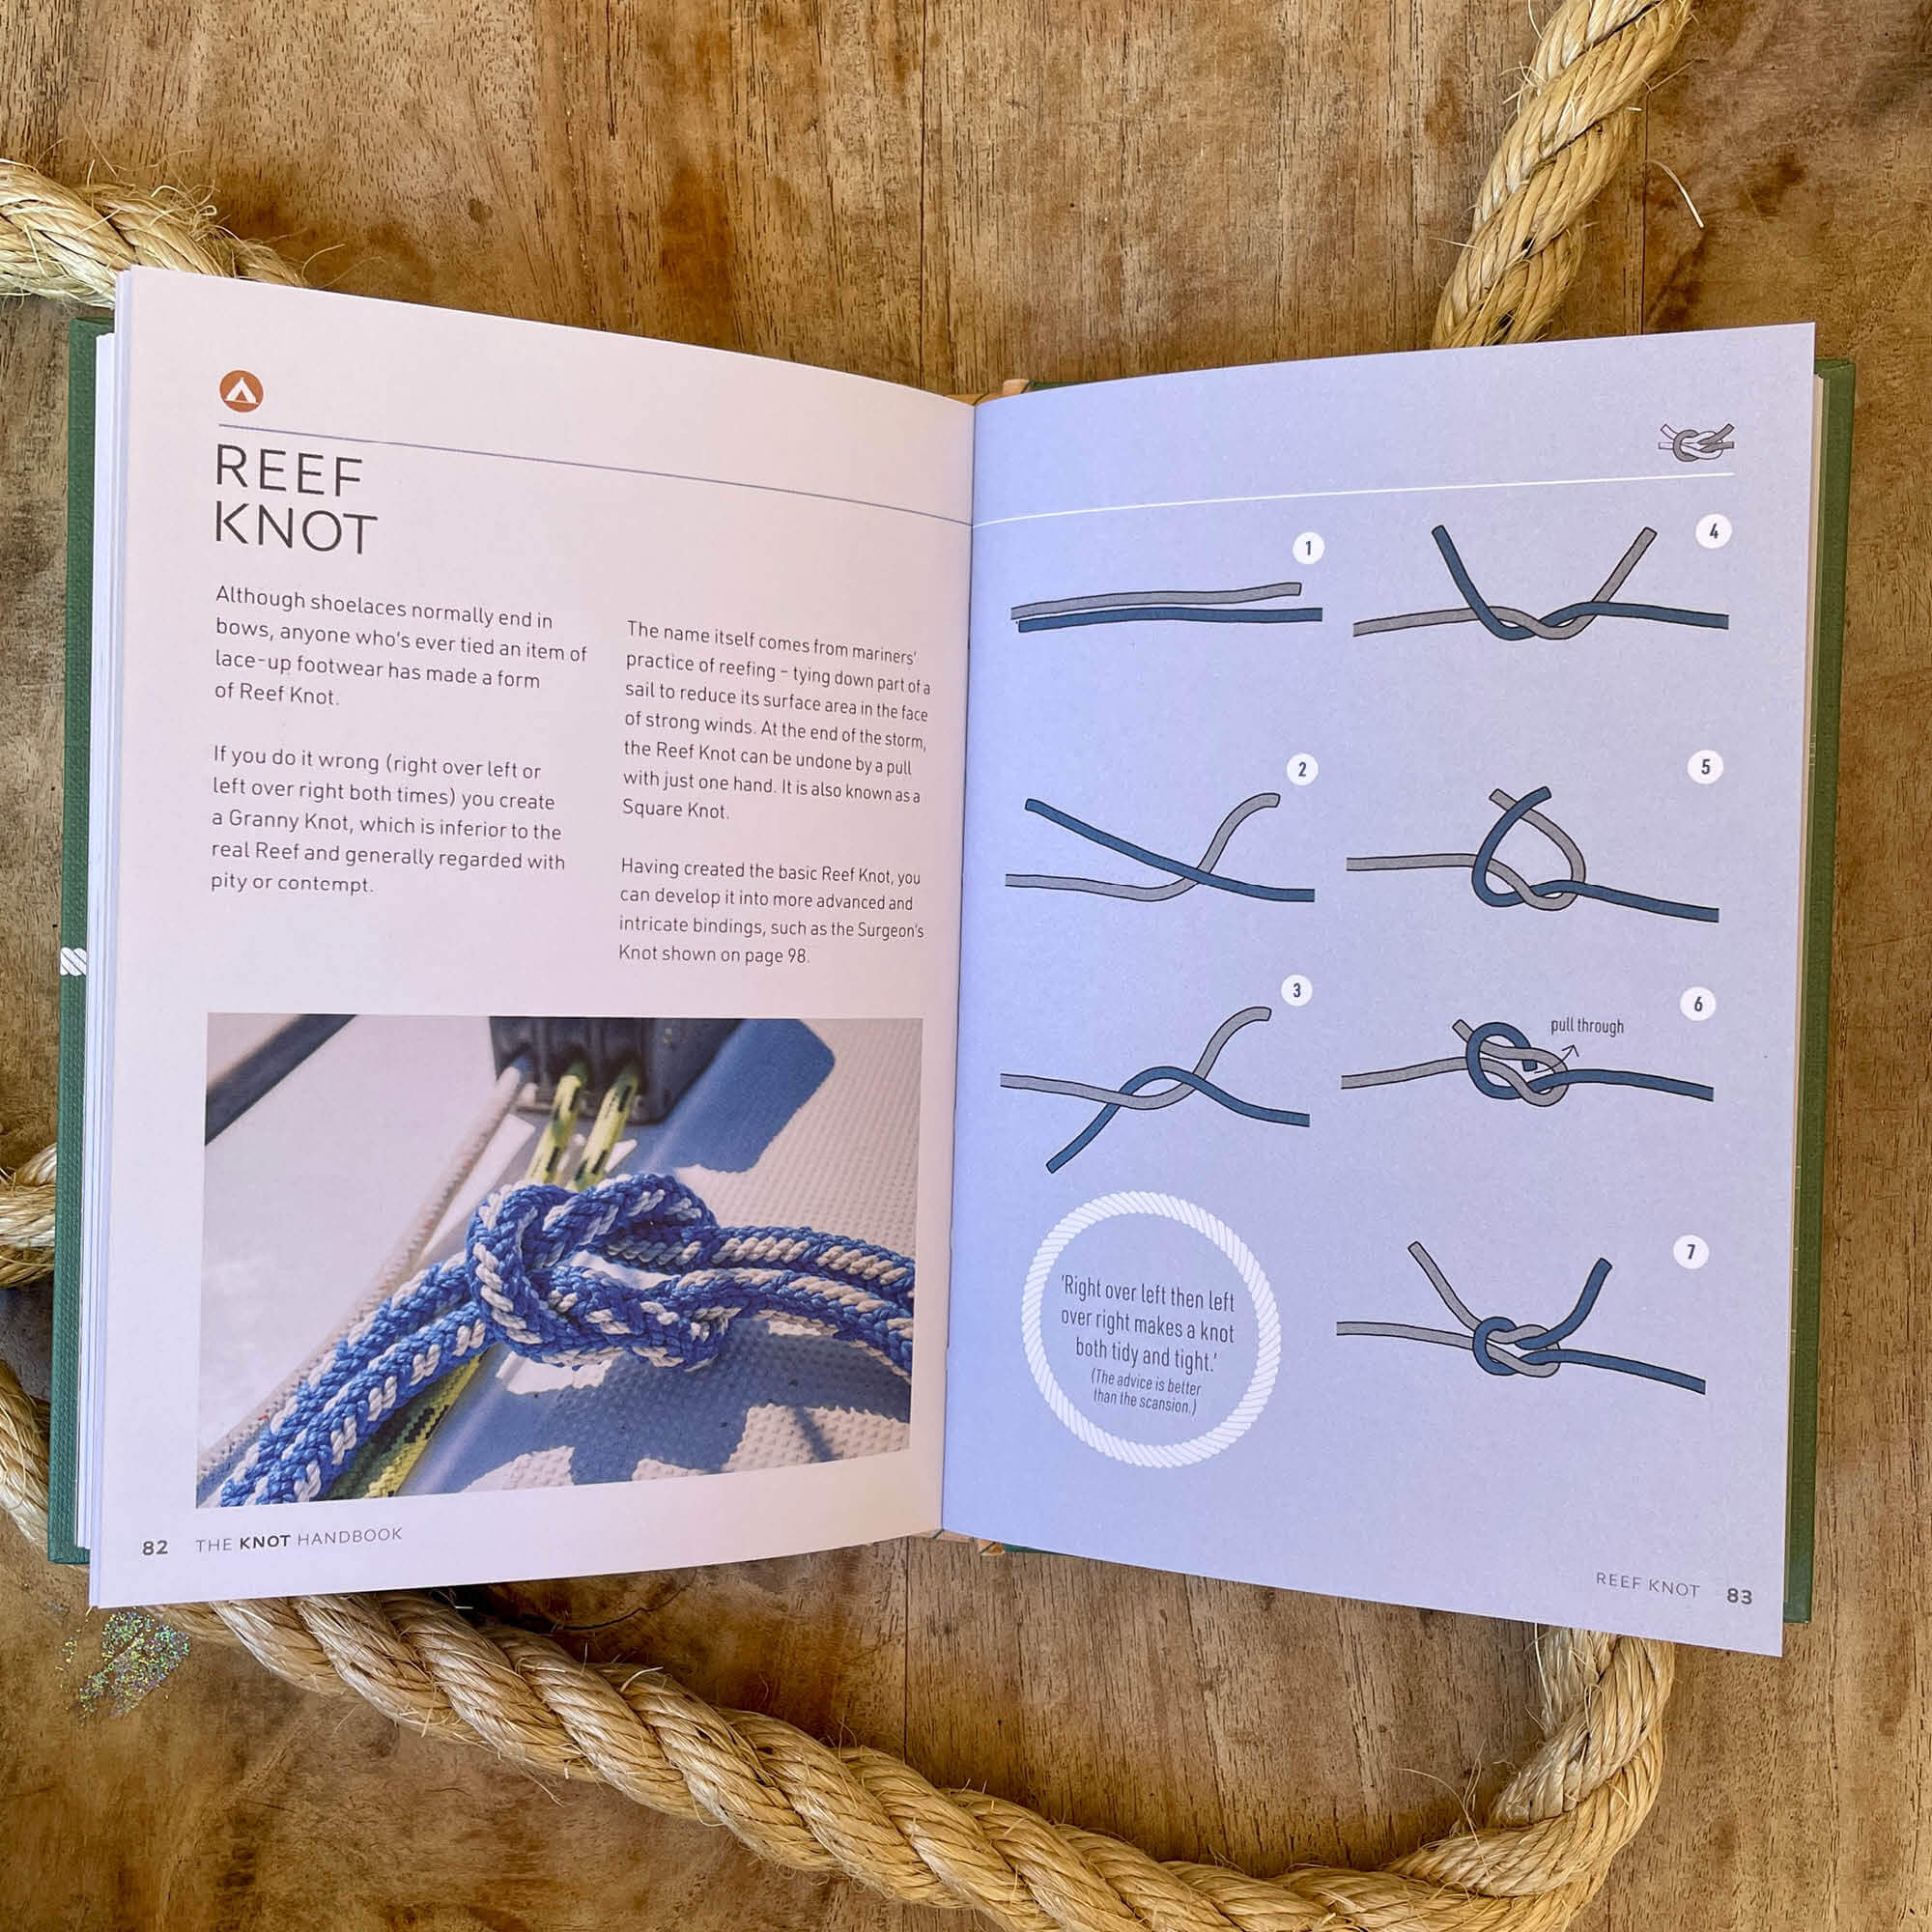 Reef knot example from The Knot Handbook by George Lewis, 50 essential knots and their uses, part of the nature inspired range at Your Wild Books 